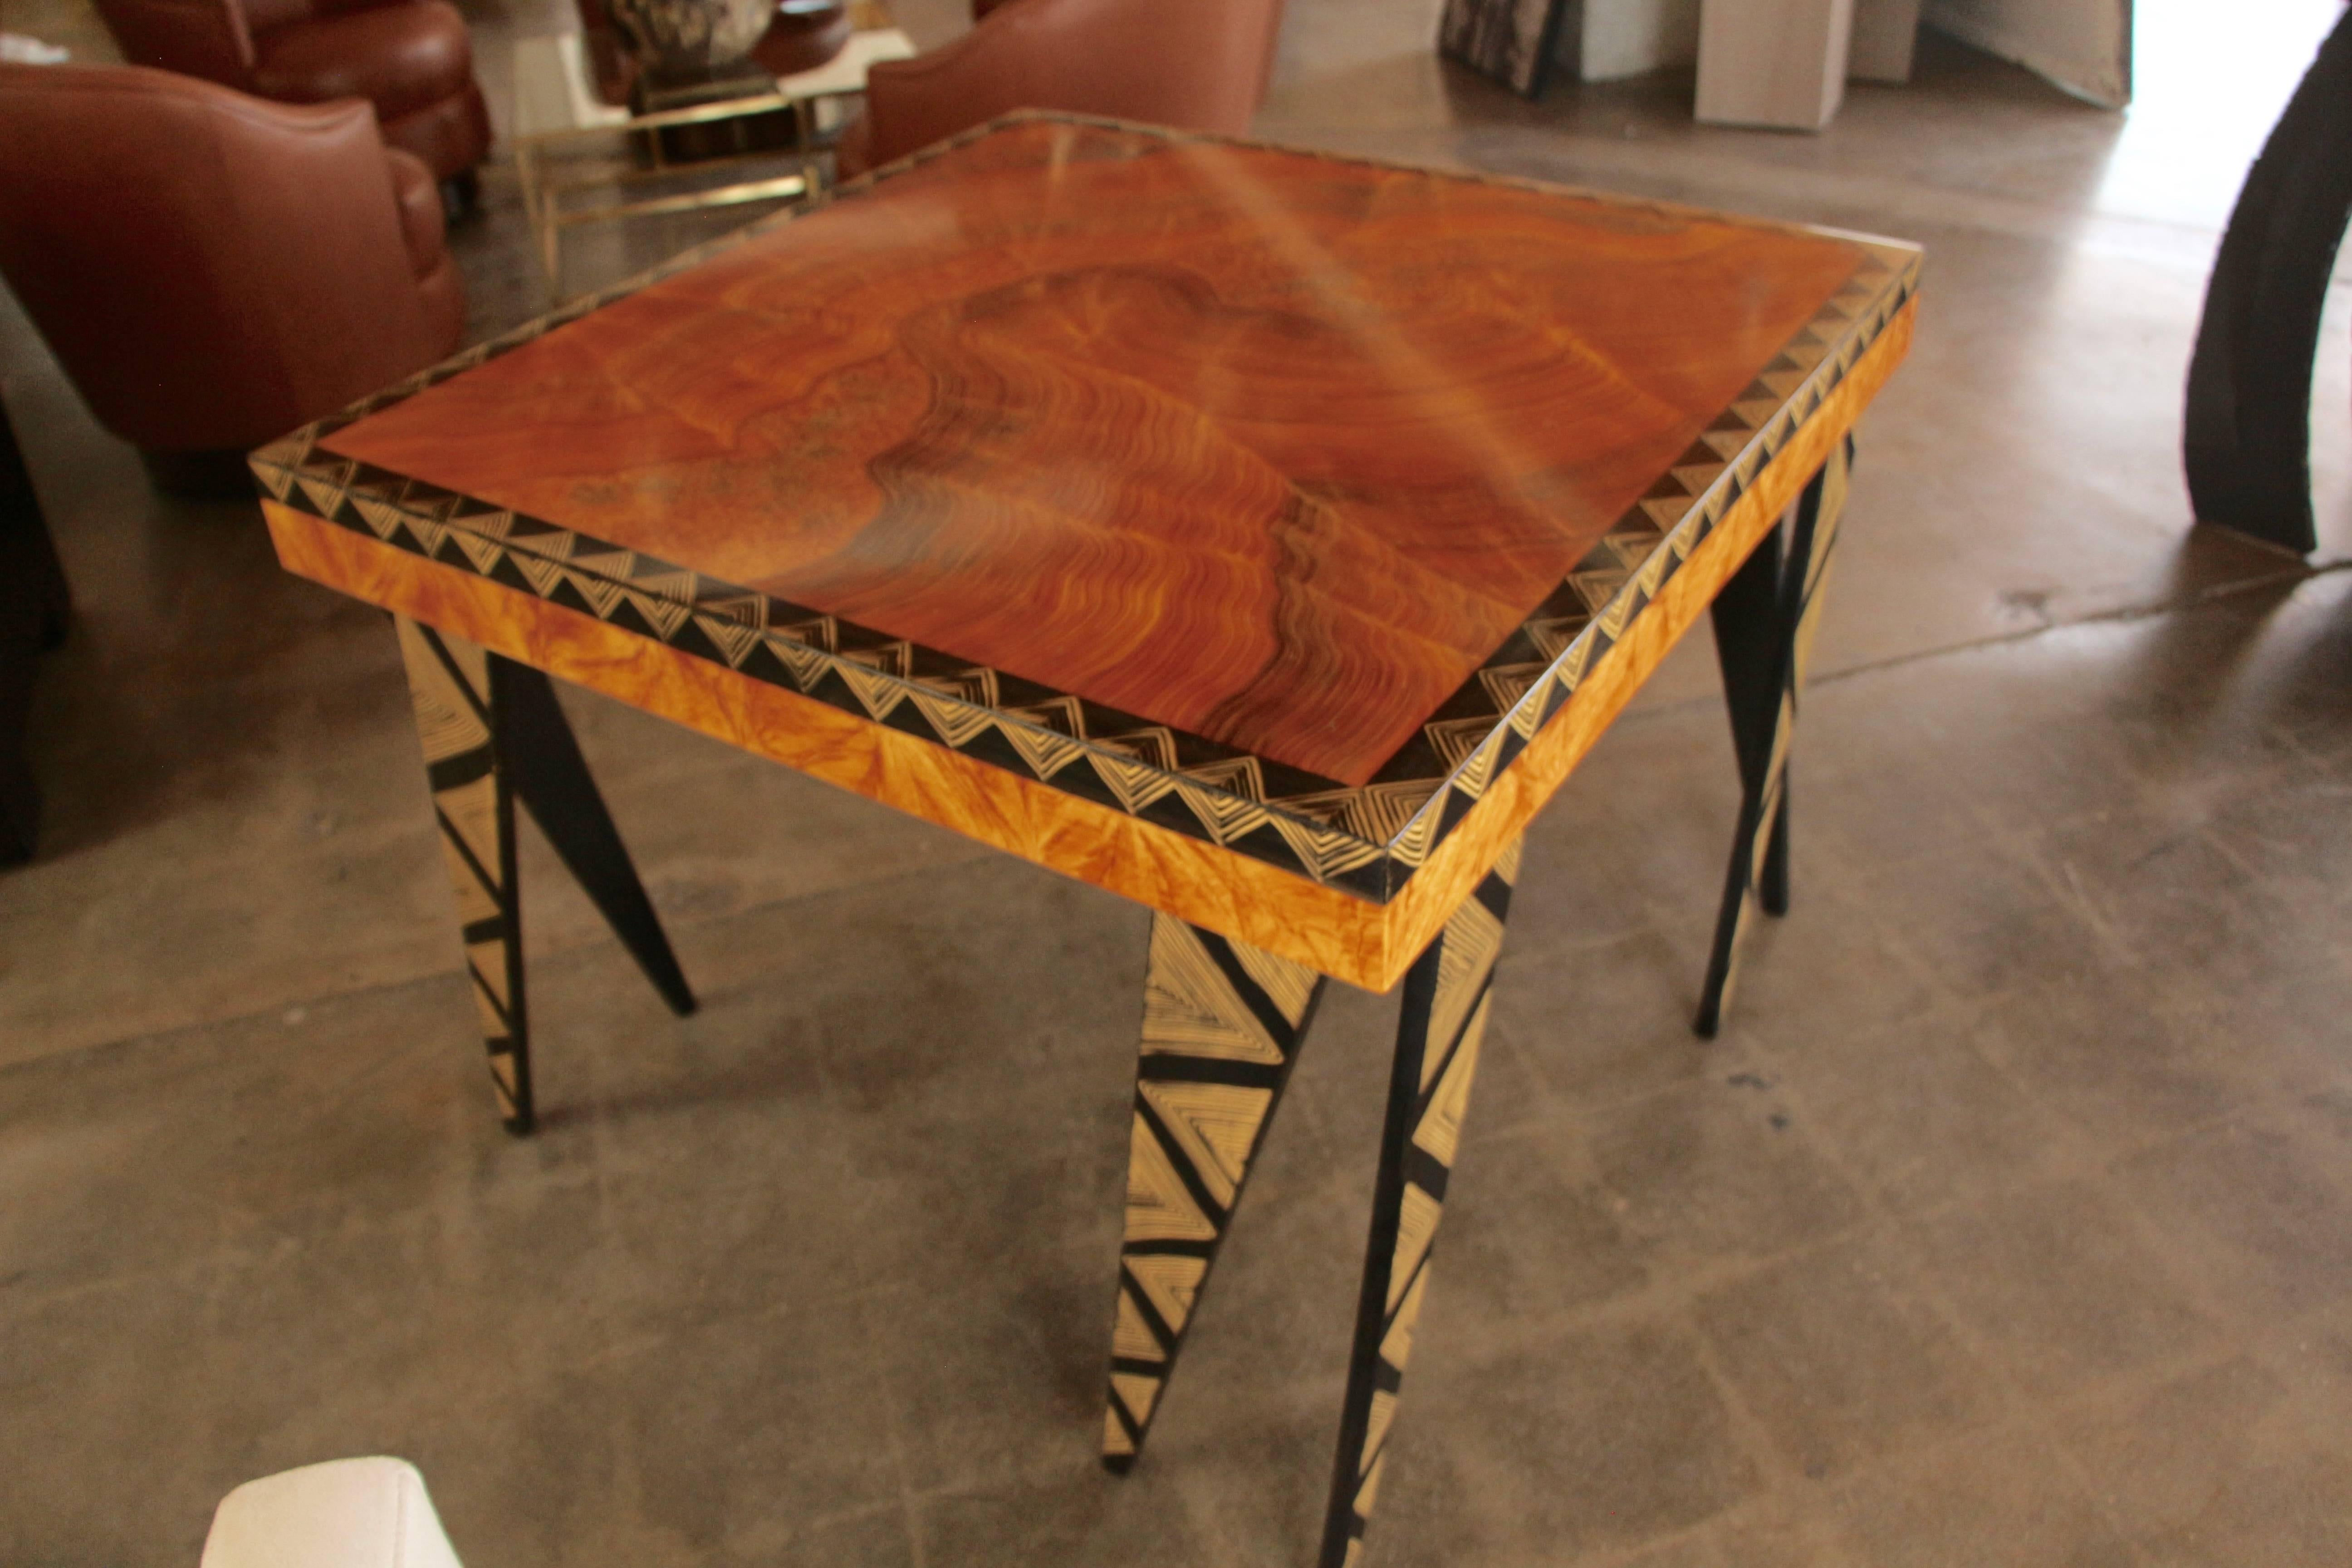 Contemporary Whimsical Table by Grant Noren